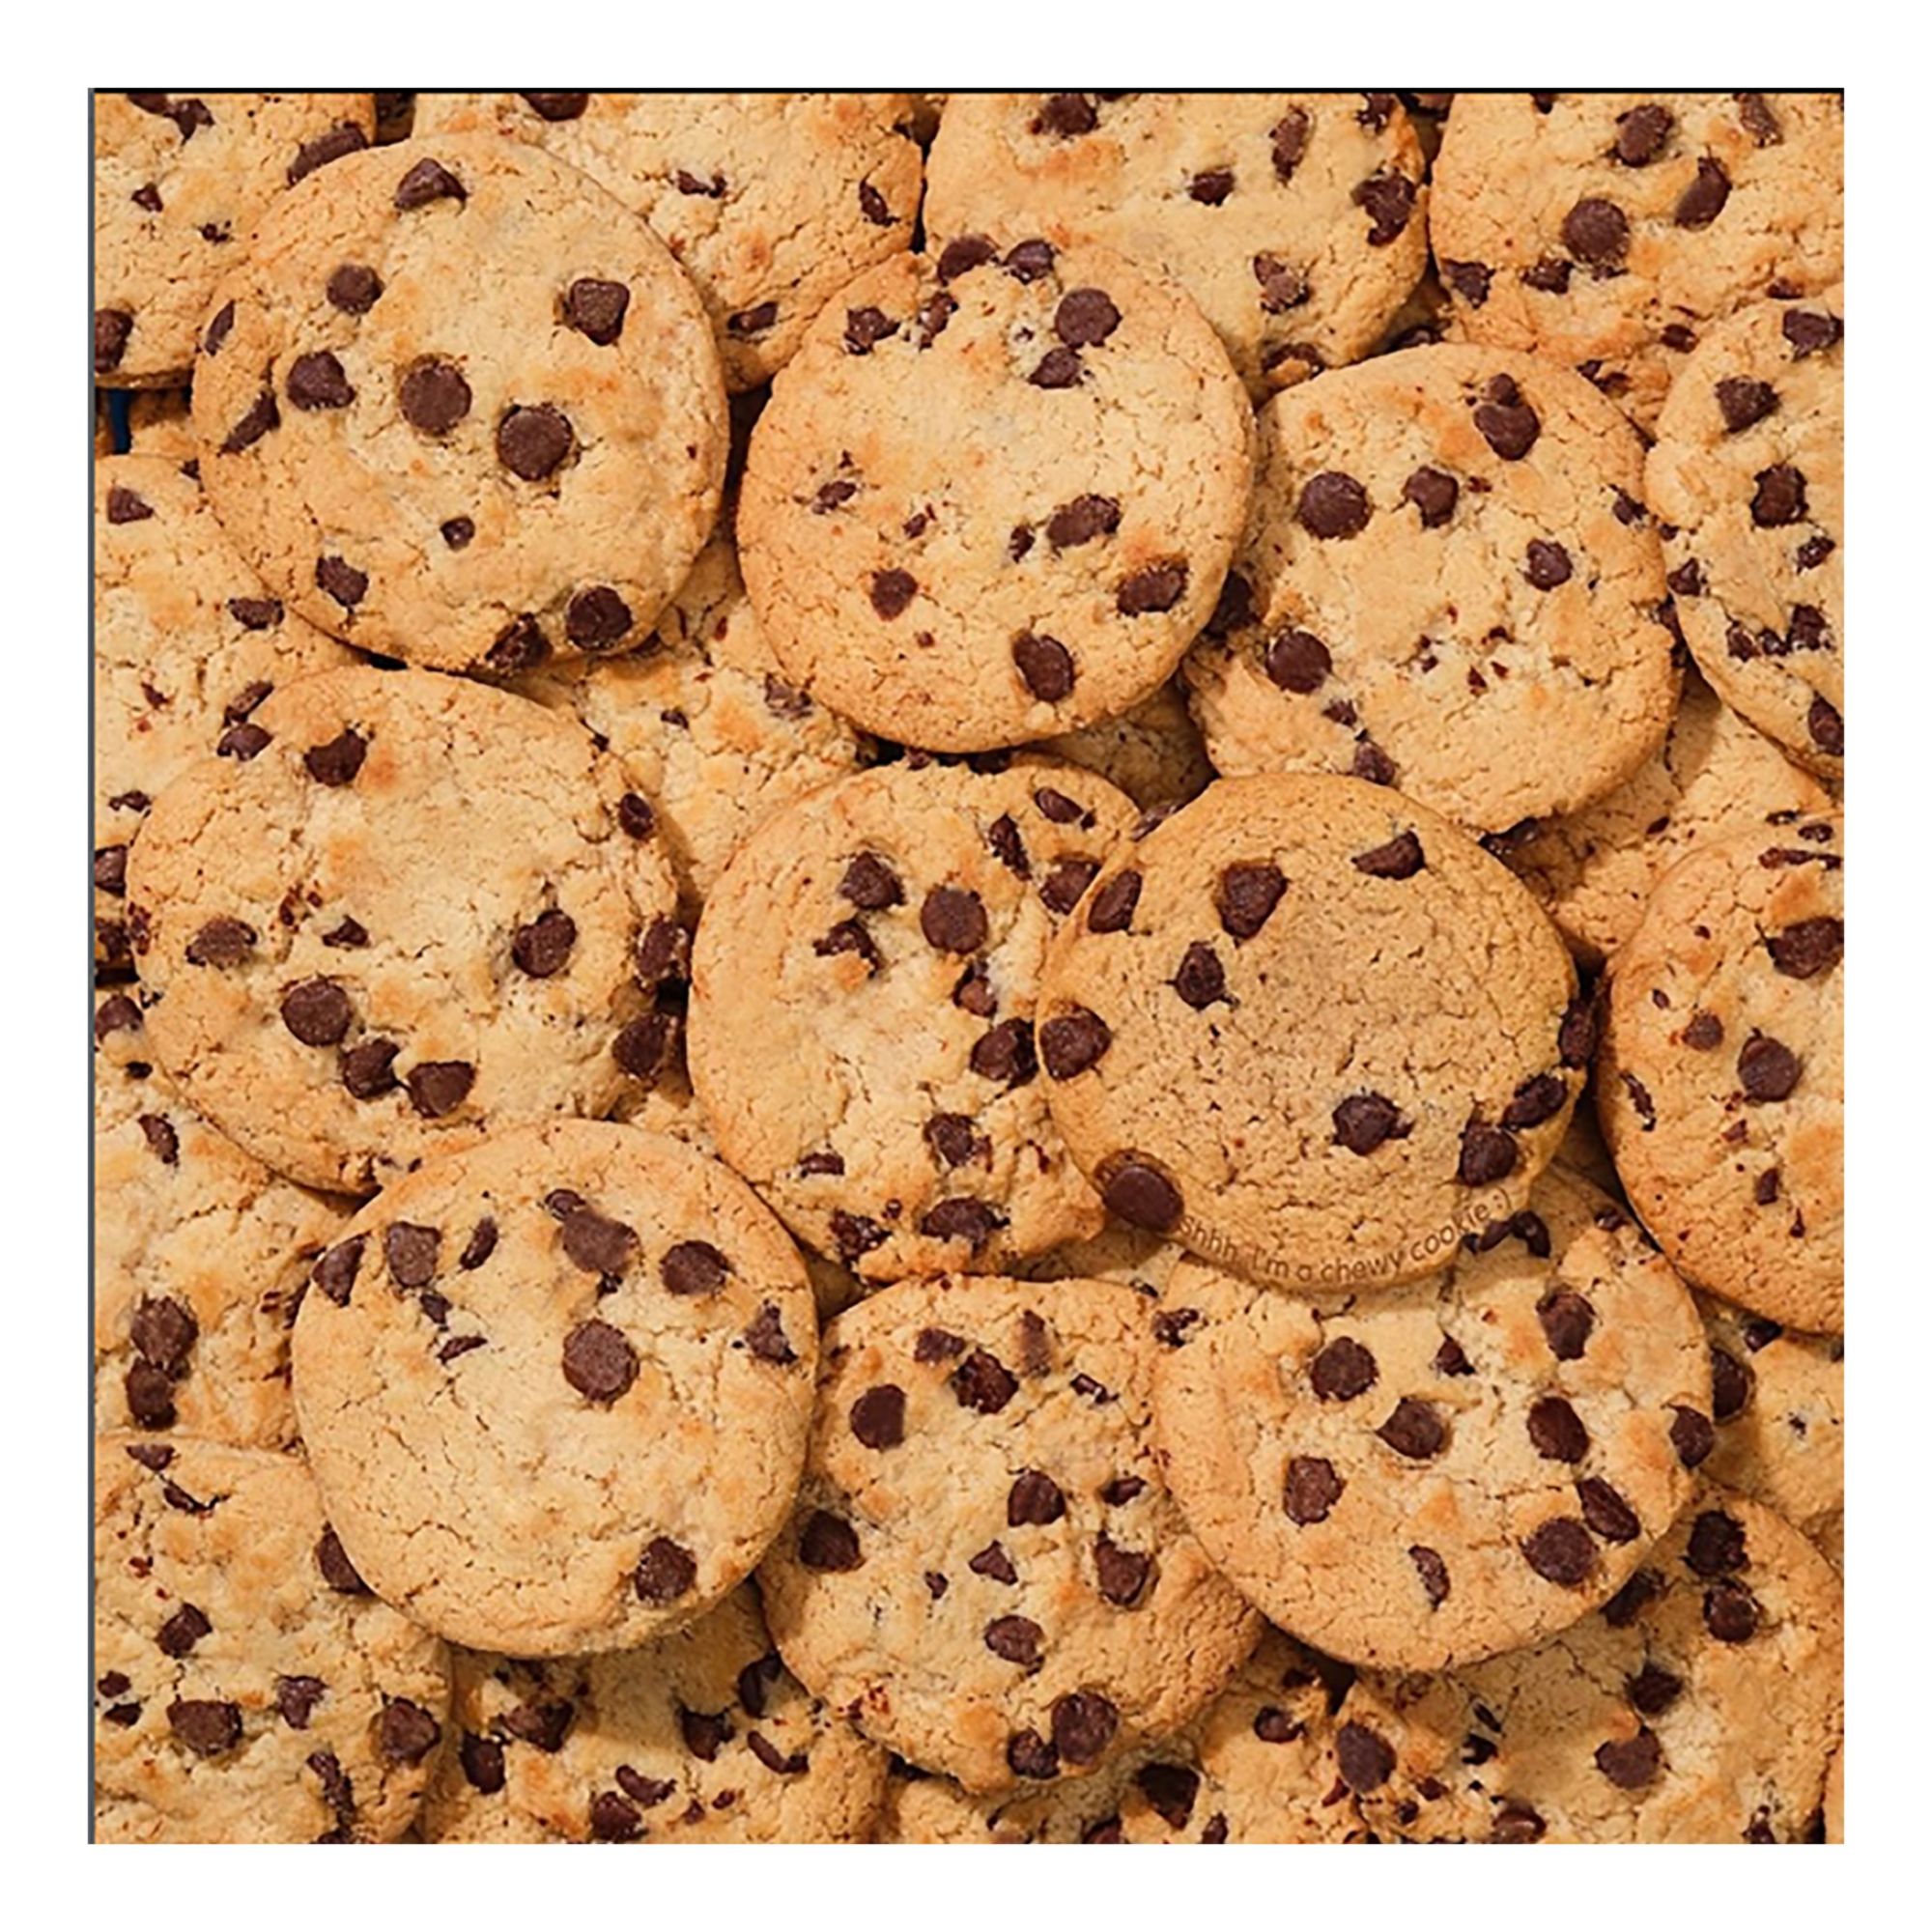 CHIPS AHOY! Original Chocolate Chip Cookies, Family Size, 12 - 18.2 Oz  Packs